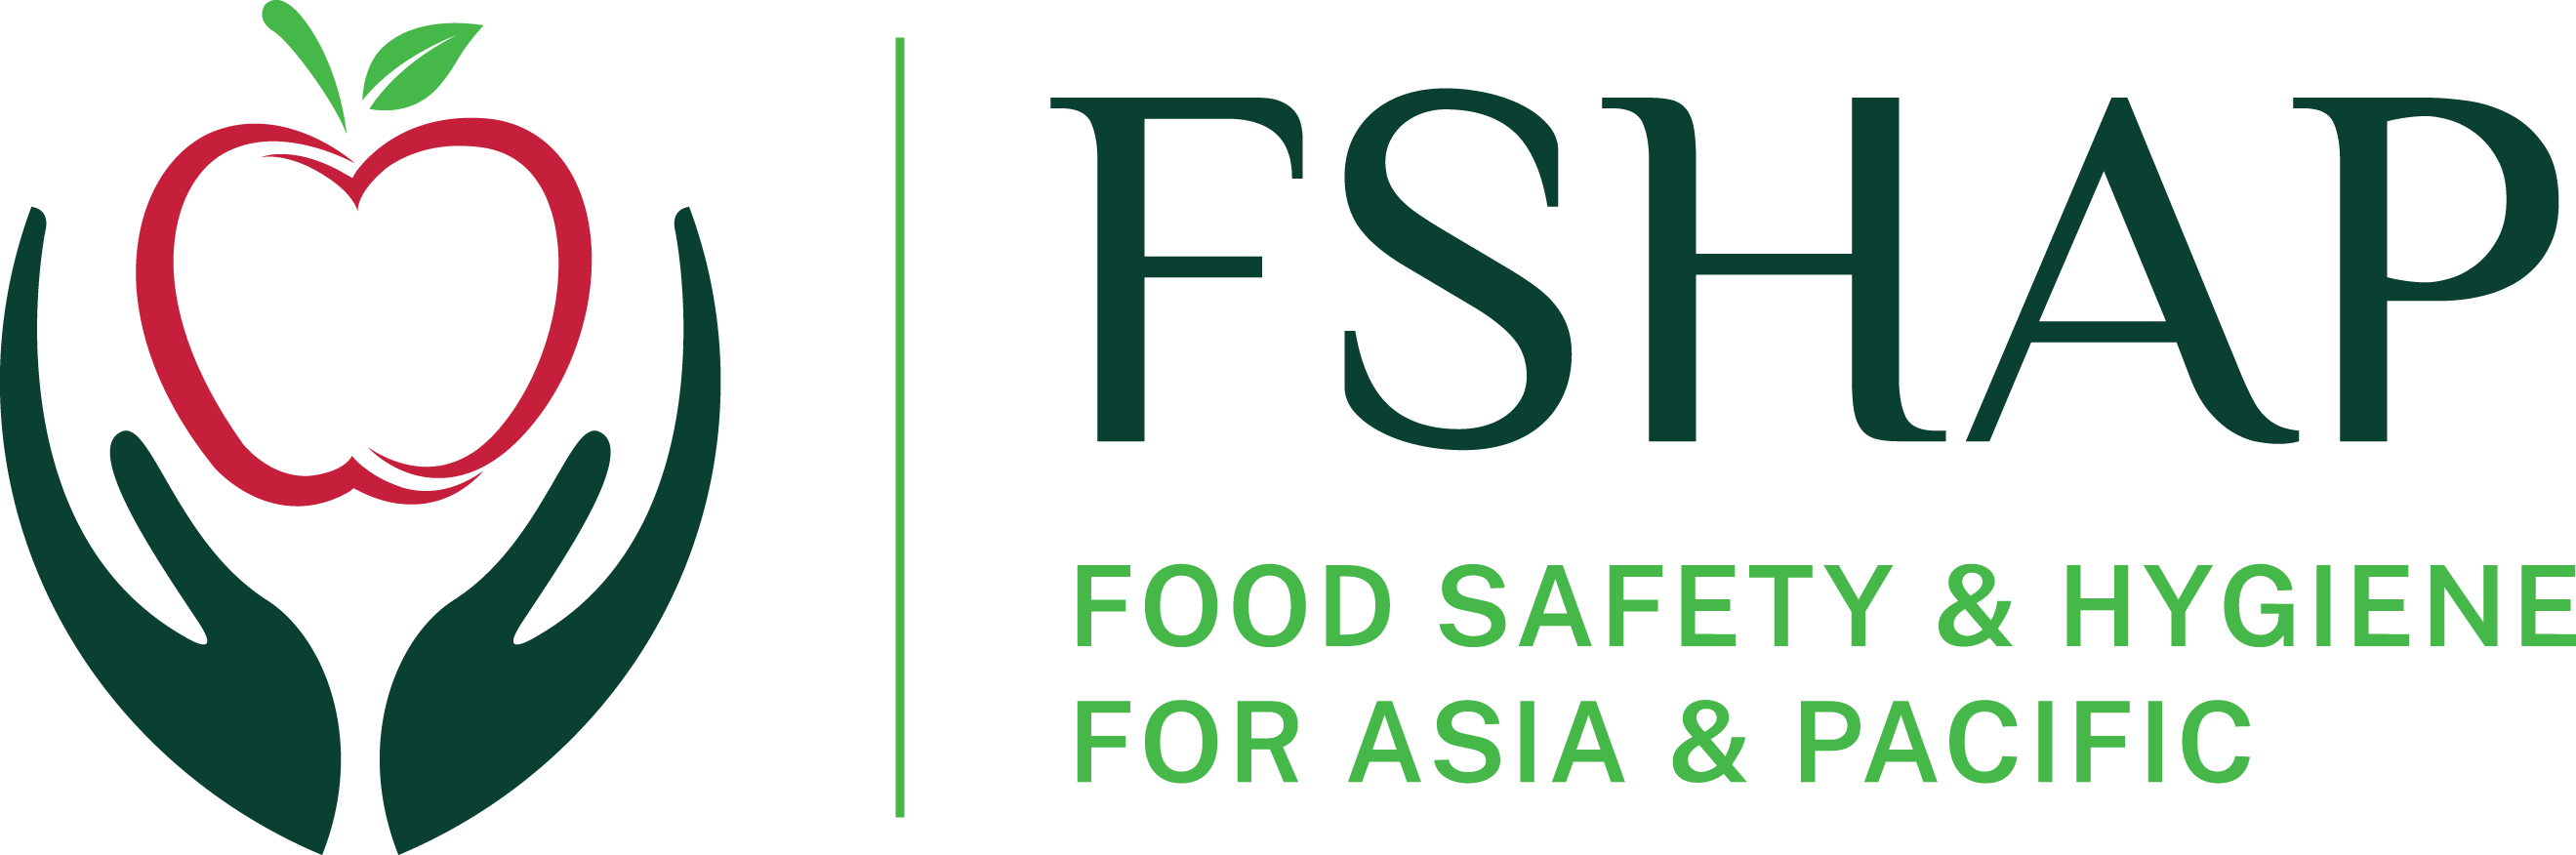 Food Safety and Hygiene for Asia and Pacific - FSHAP logo